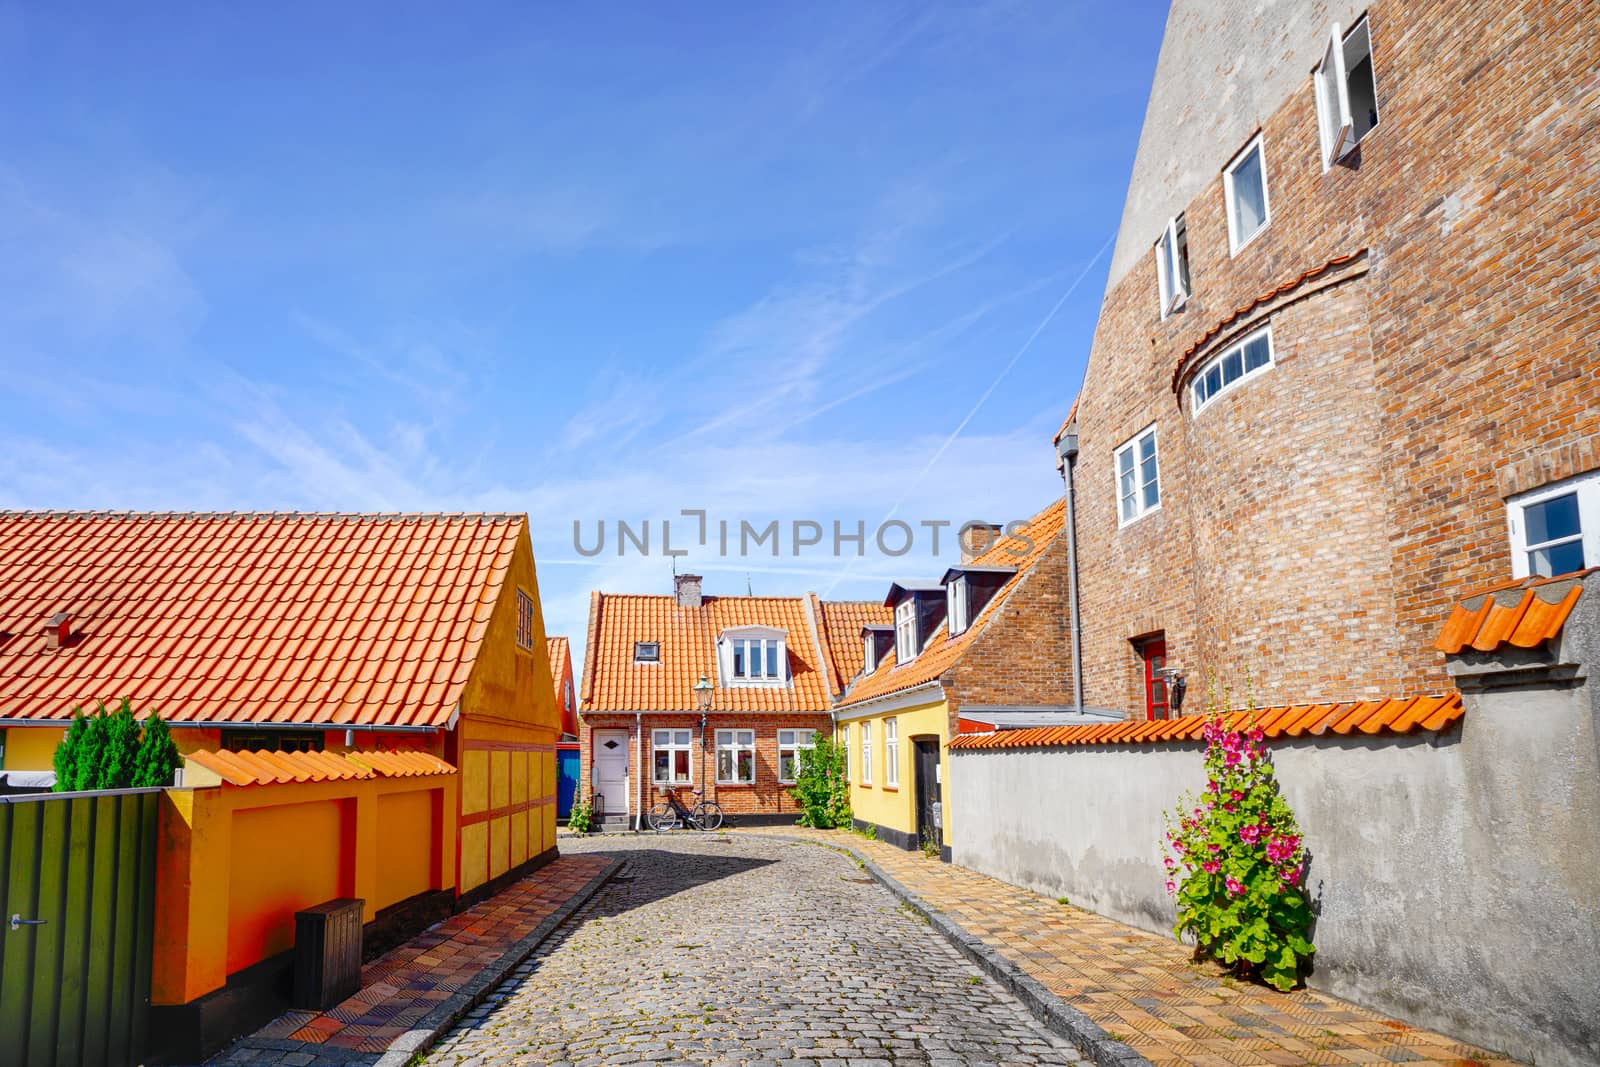 Colorful danish street in the summer with small houses under a blue sky